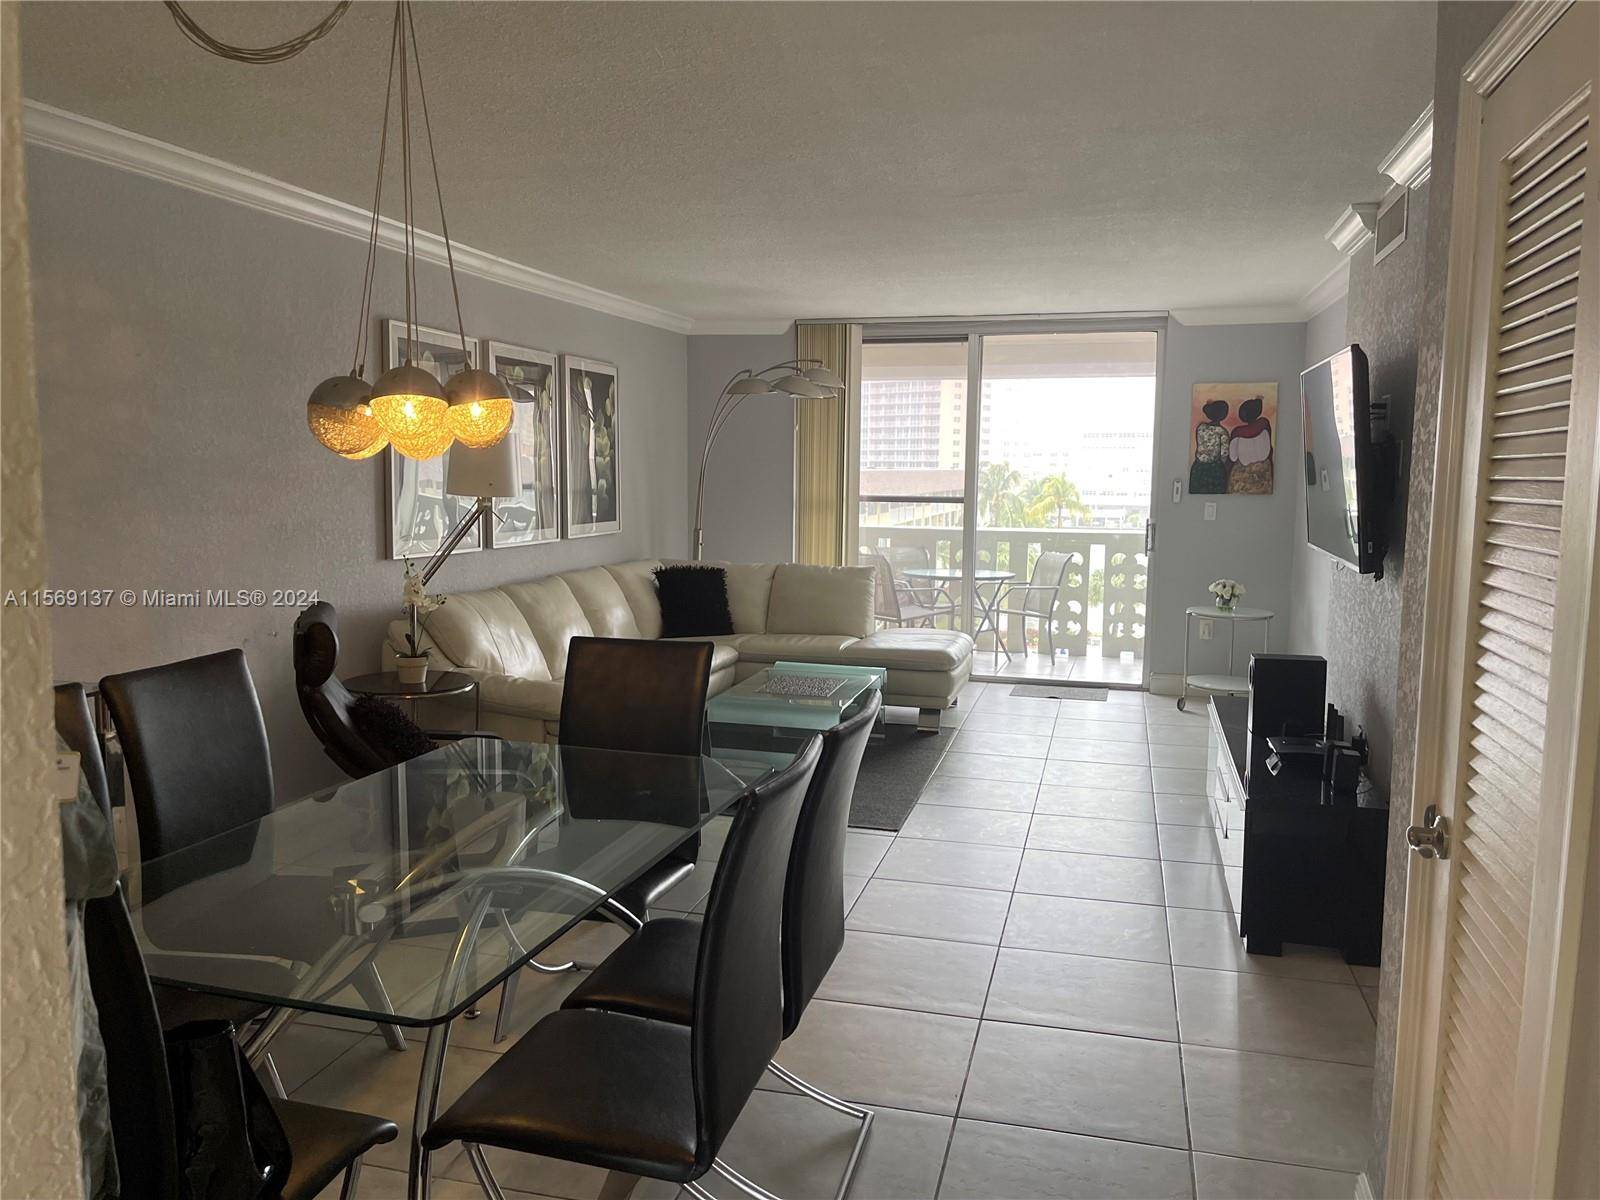 Beautiful 2 bedrooms and 2 bathrooms unit in the intracoastal, this amazing and unique fully remodeled unit has everything anyone can need, spacious and beautiful views a great place to ...